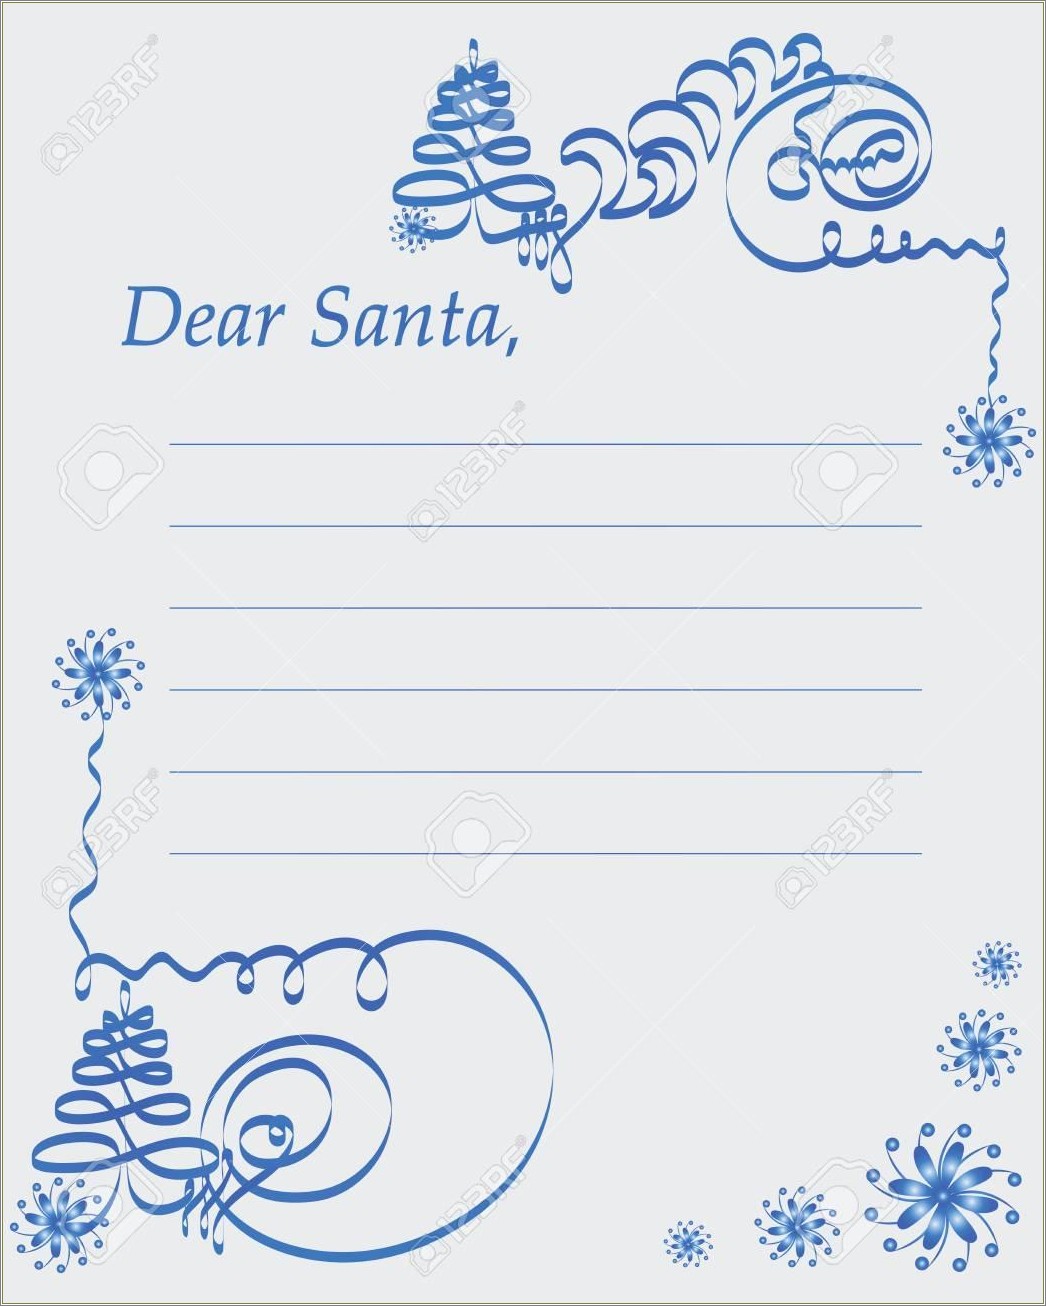 Dear Father Christmas Letter Template Free